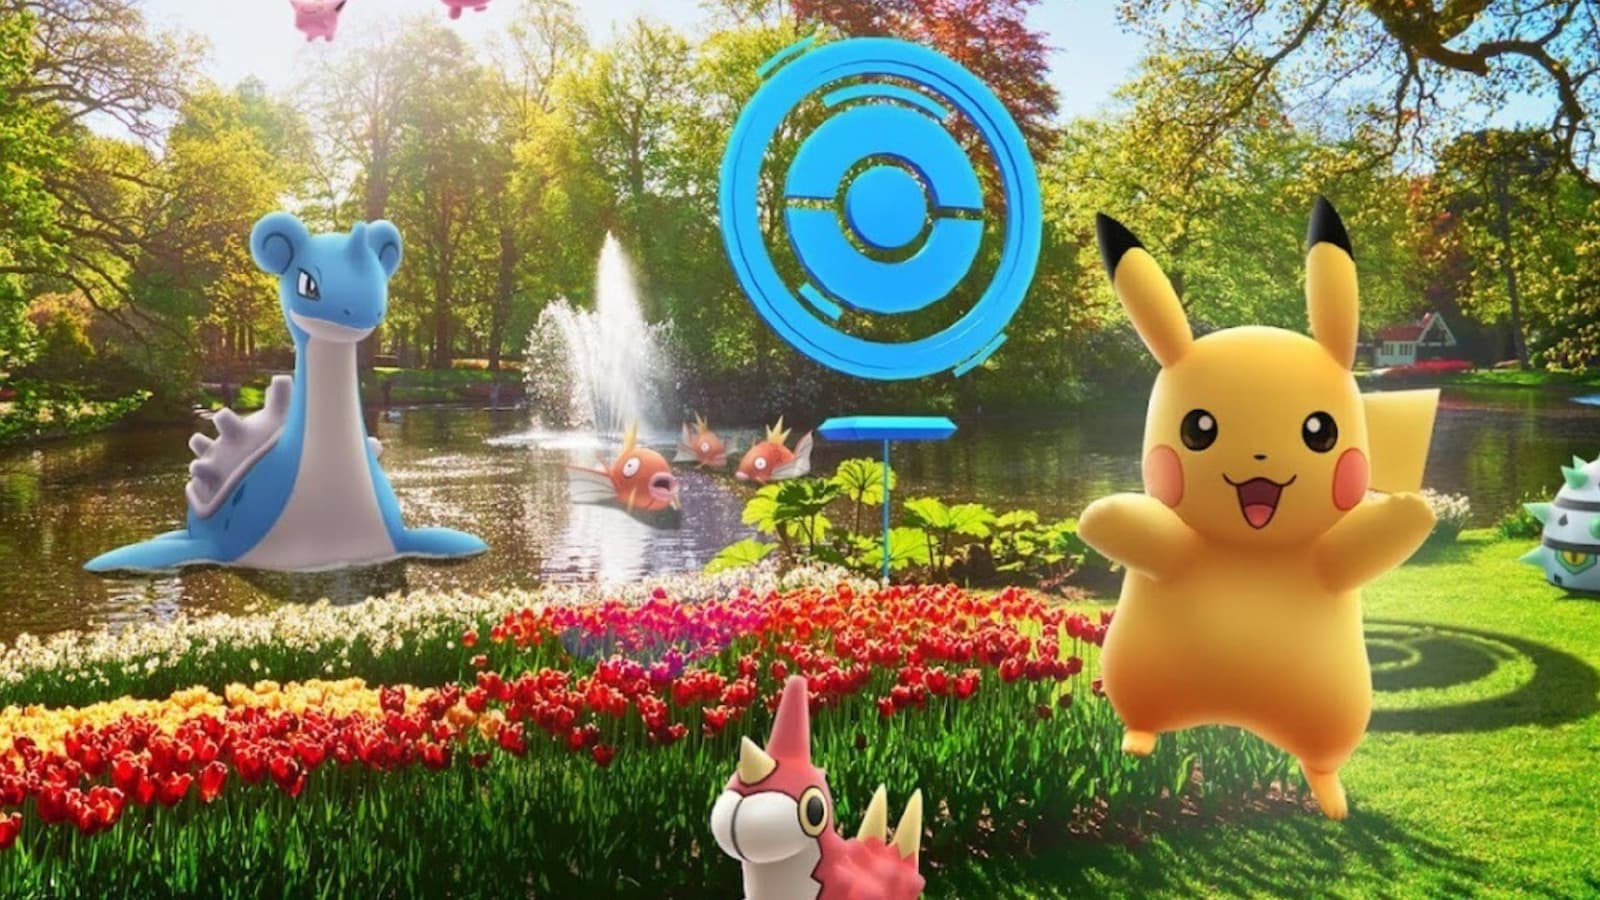 Pikachu and Lapras in front of a Pokestop in Pokemon Go